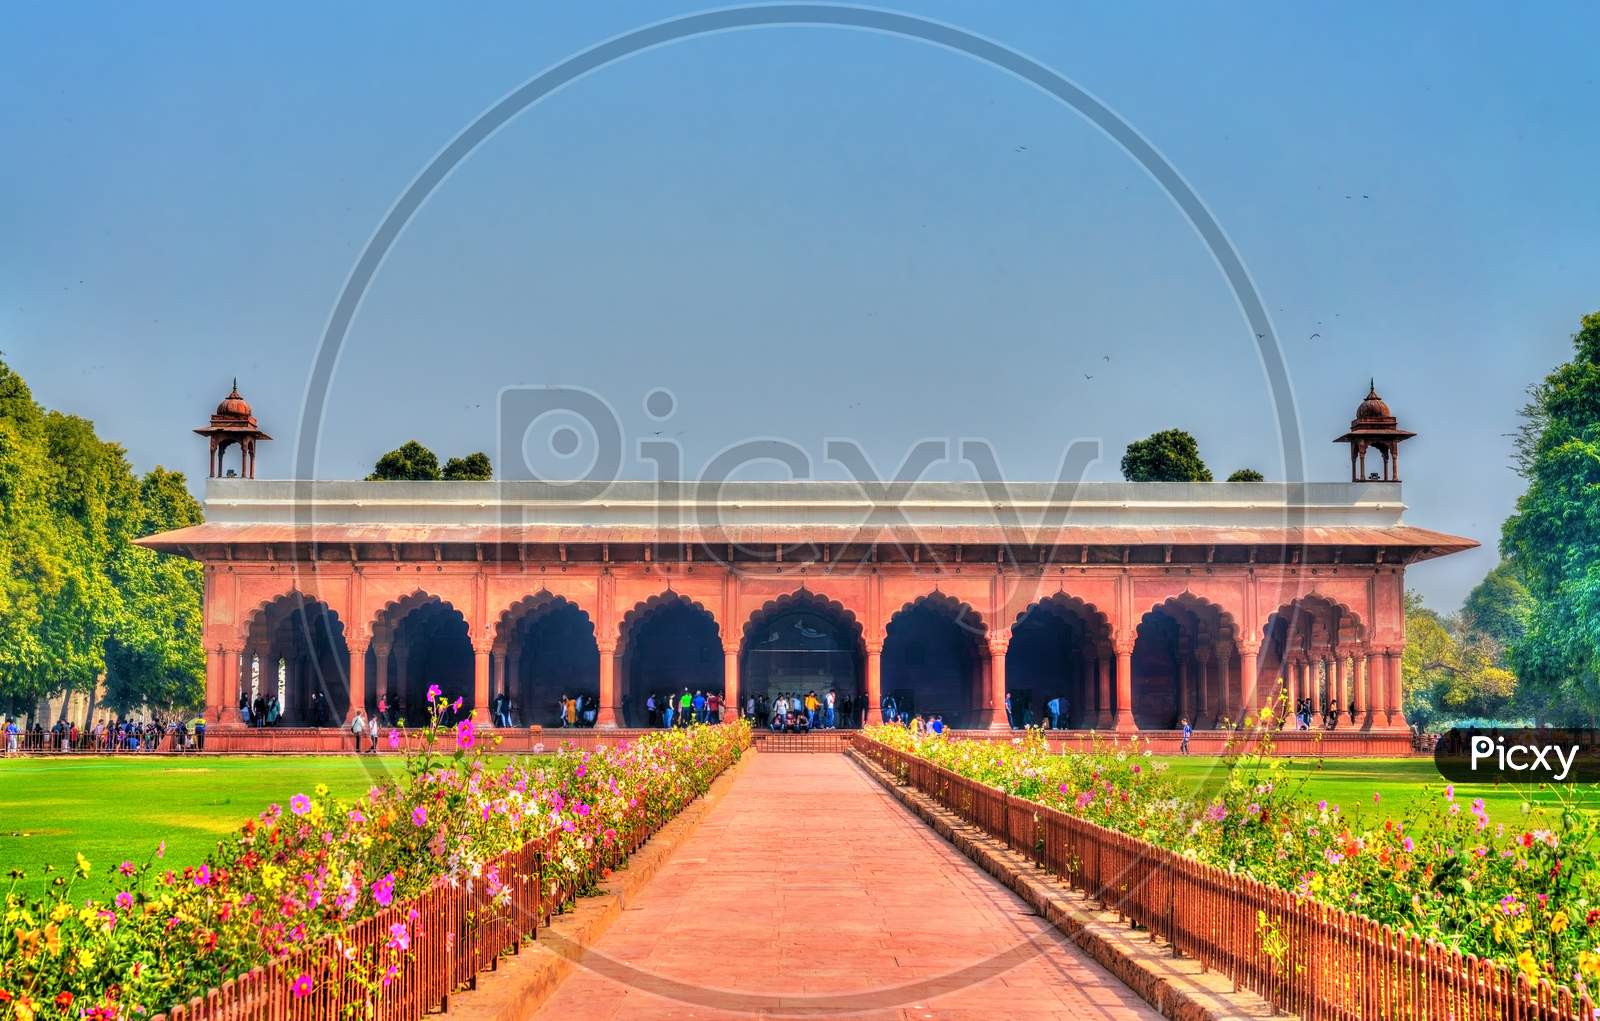 The Diwan-I-Am Or Hall Of Audience At The Red Fort Of Delhi, India